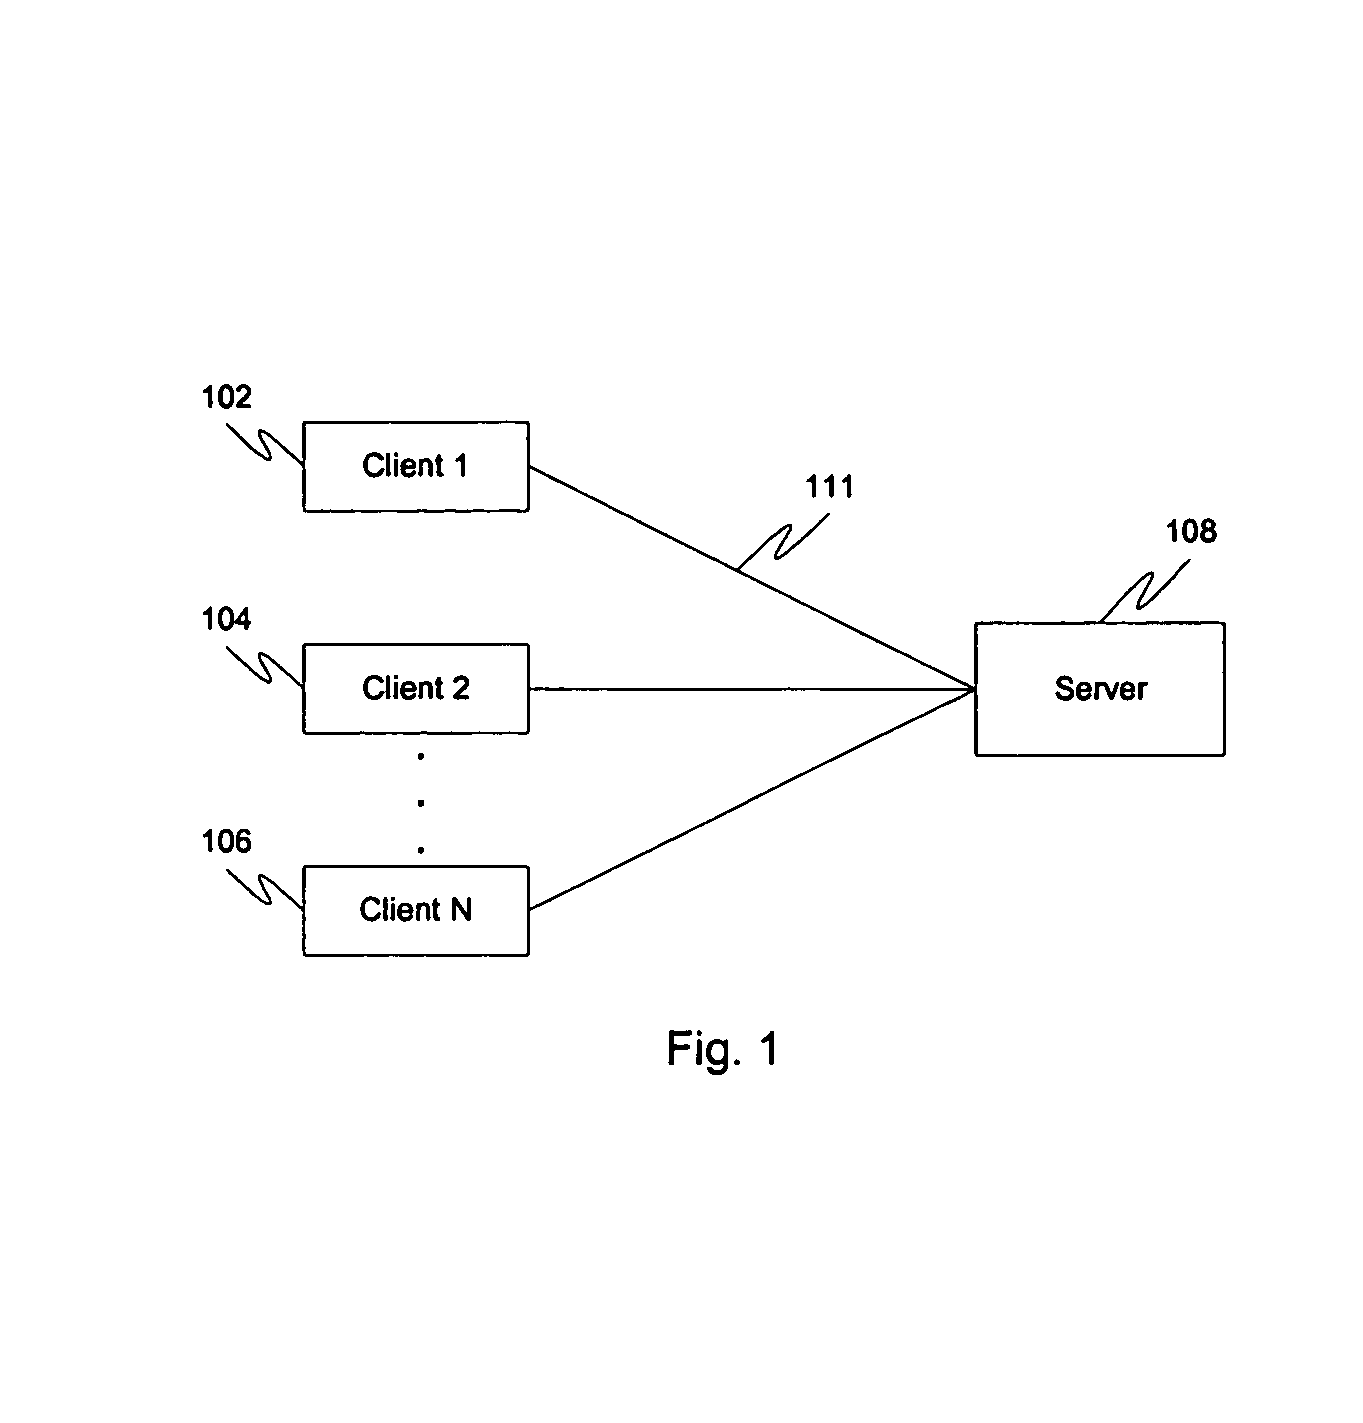 System and method for program execution